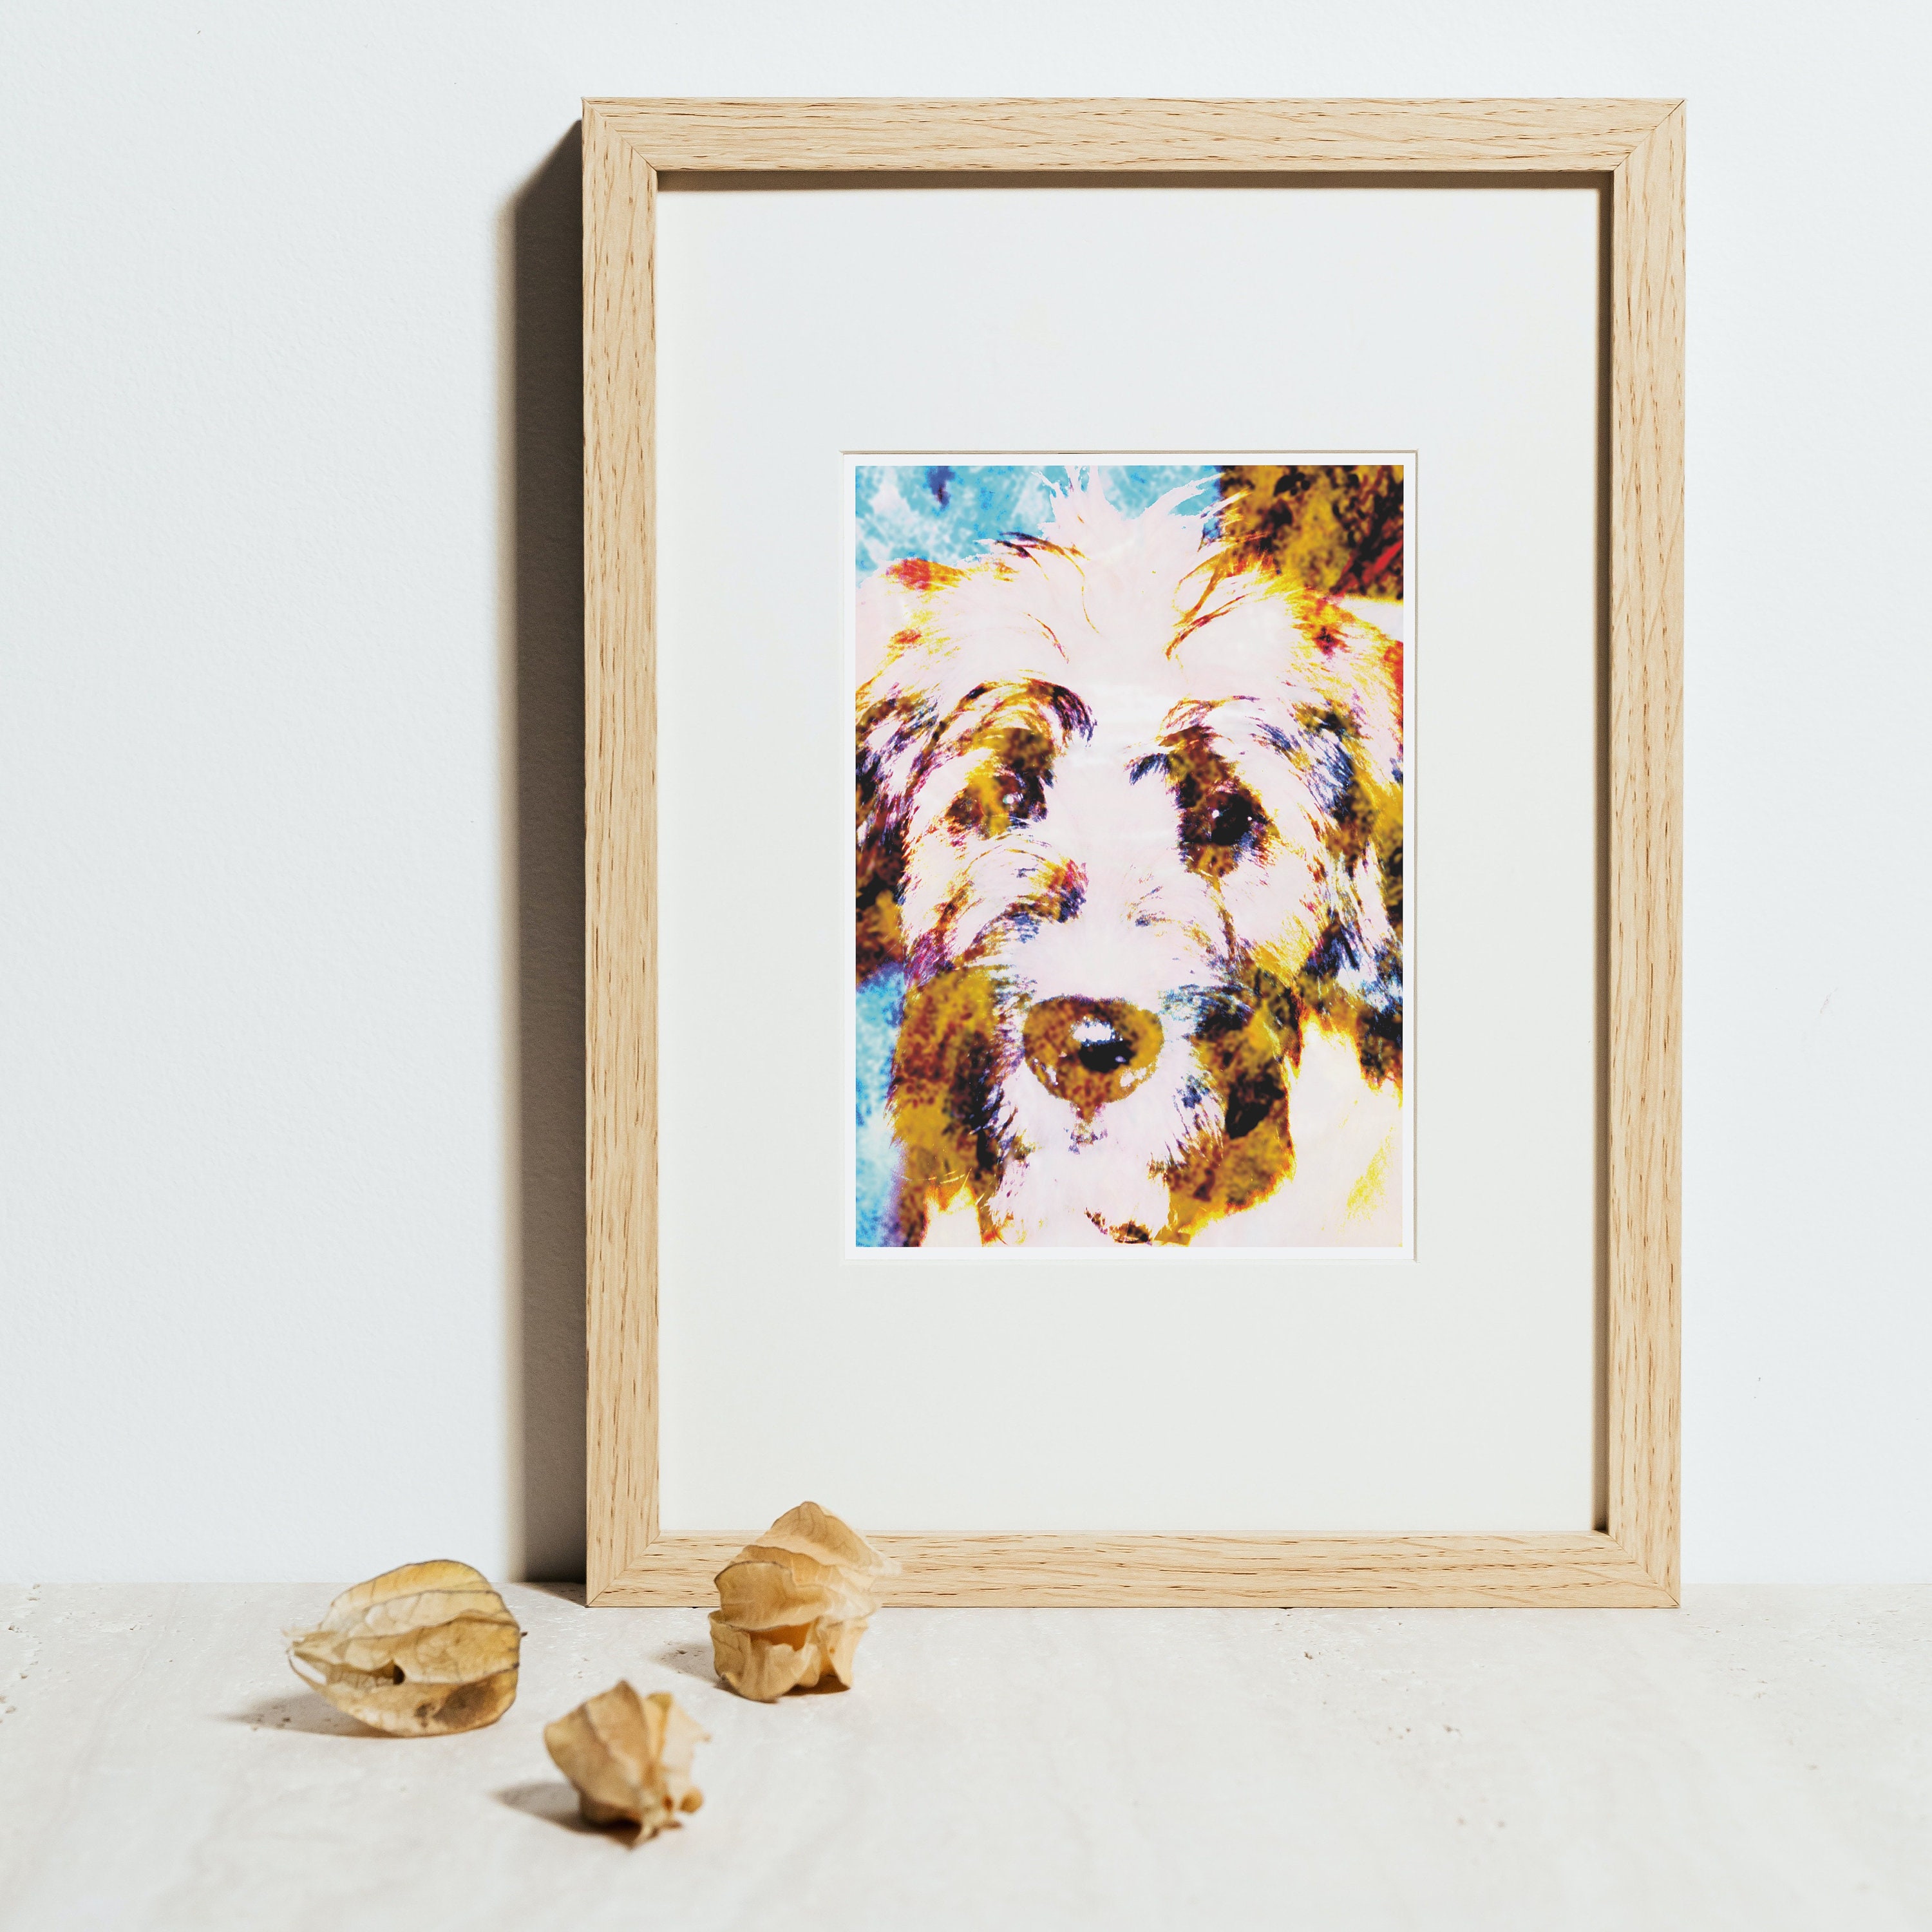 Cute Dog Printable Wall Art Slightly Blurred and Pixelated | Etsy